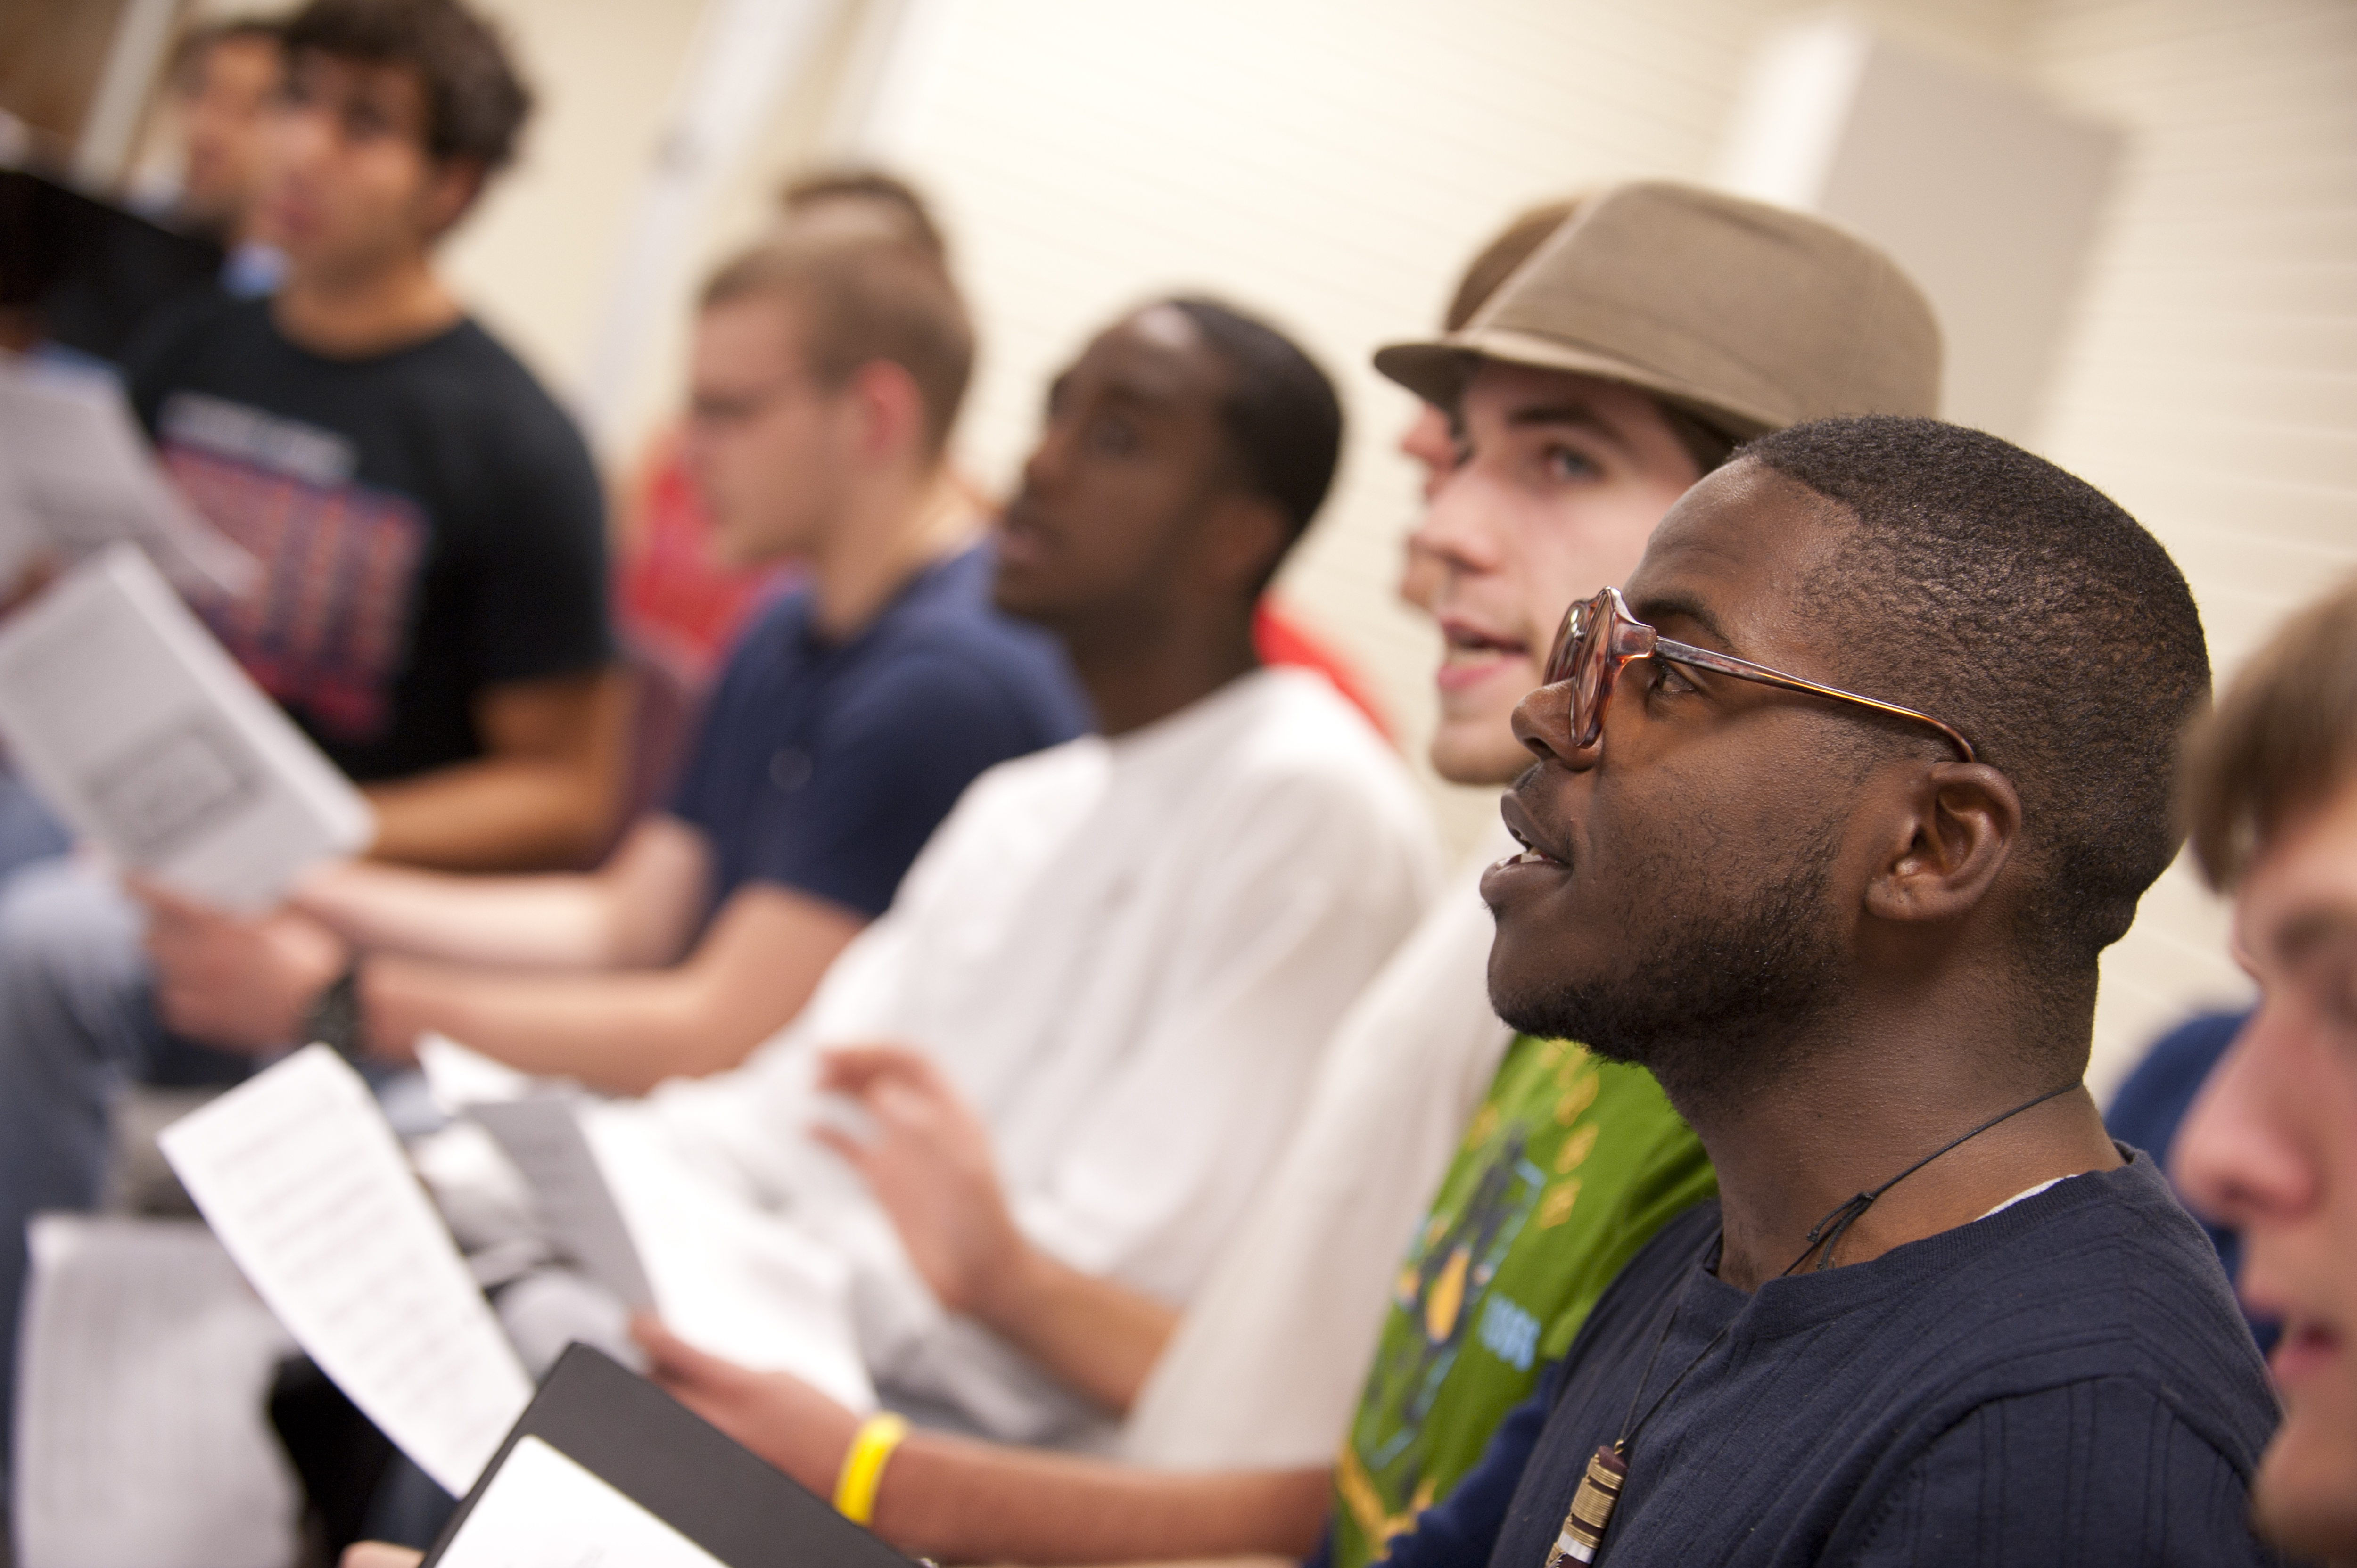 Students at Westminster College listen intently during a class session.